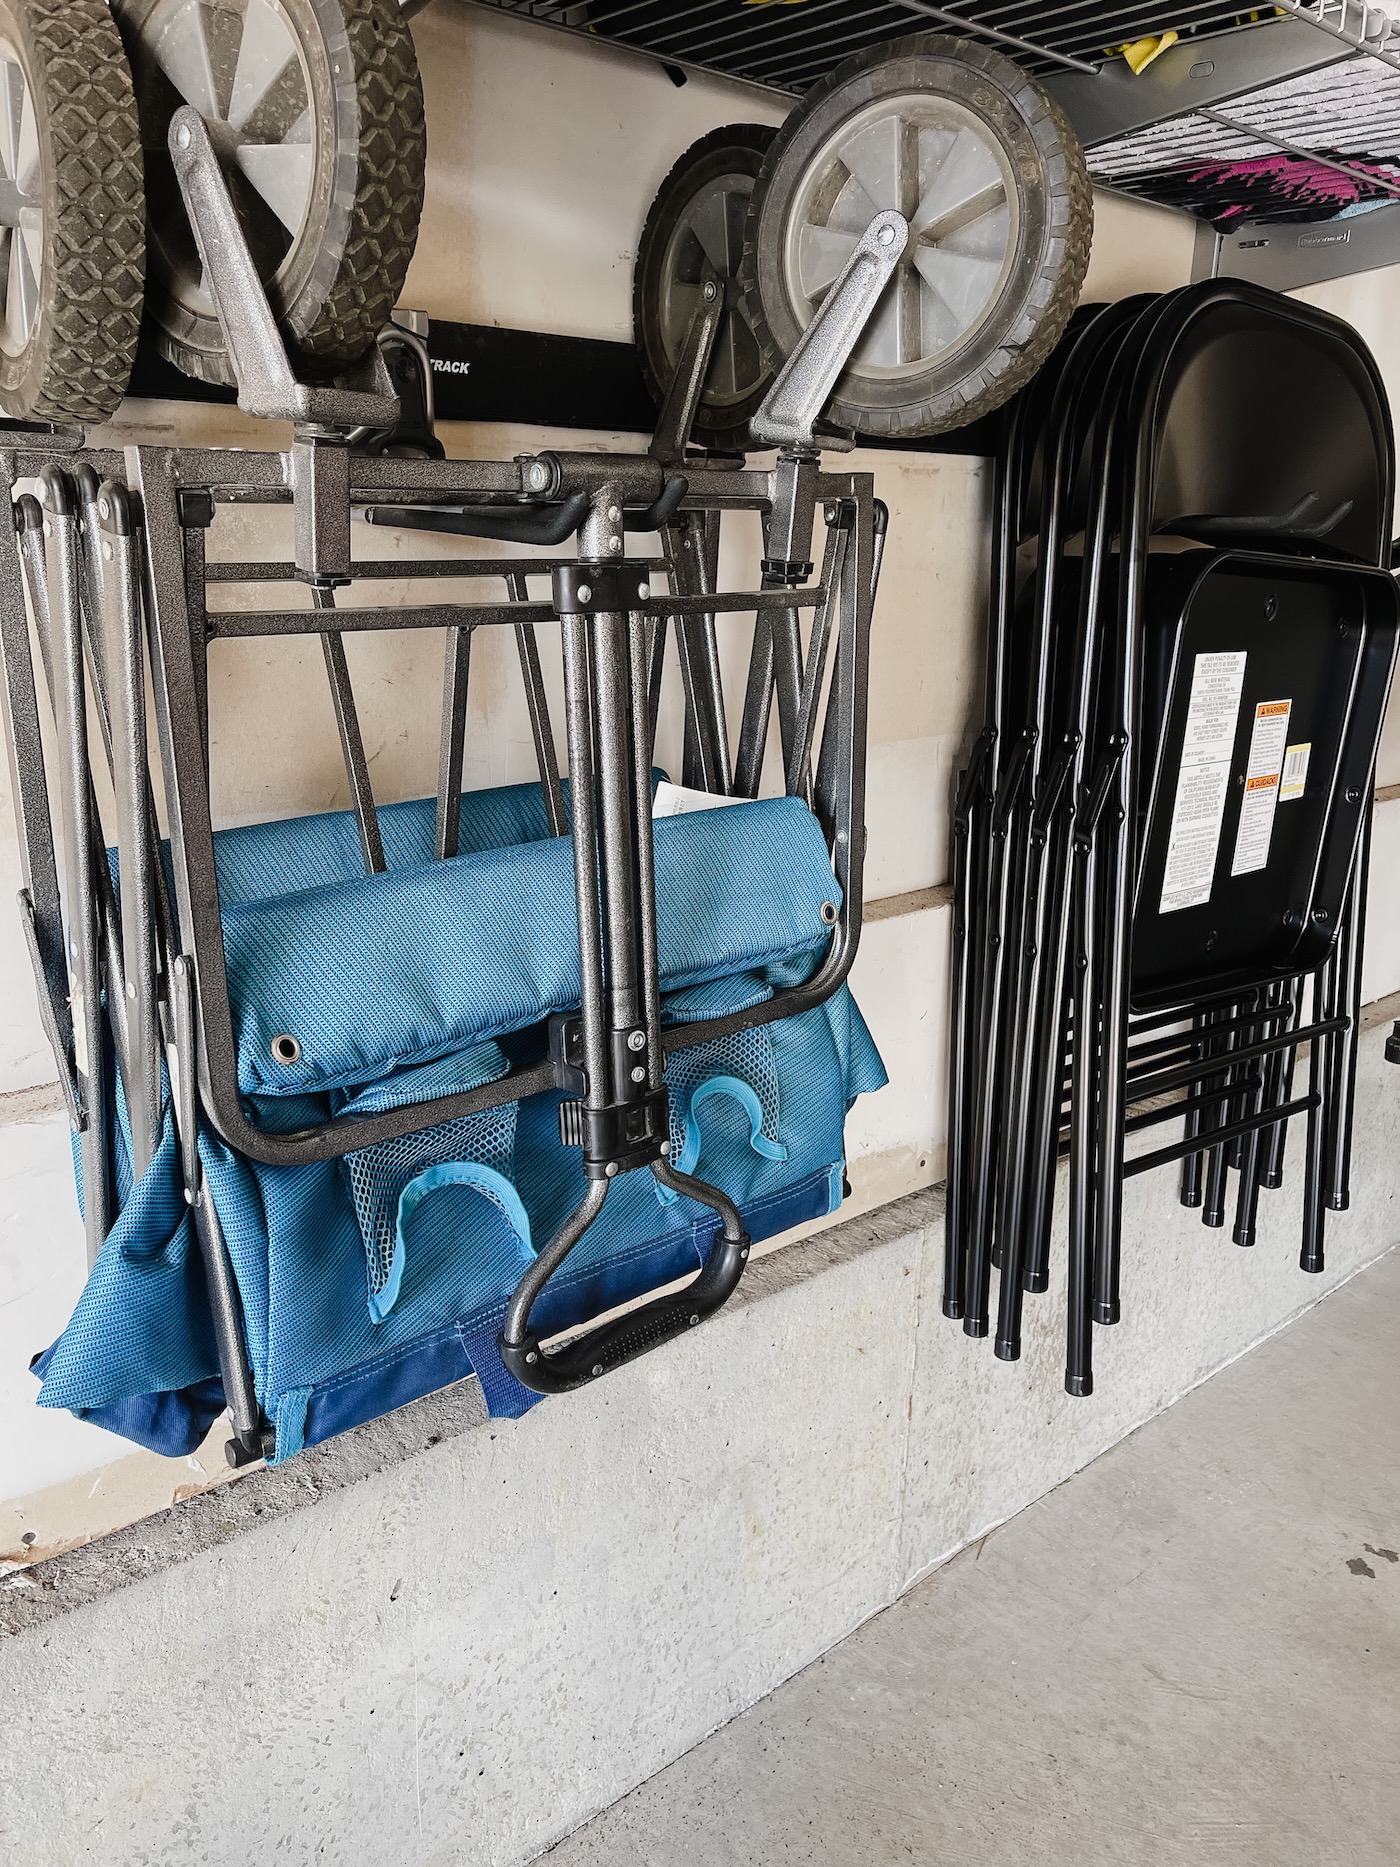 Easy Garage Storage Using the Rubbermaid FastTrack System - Life Love Larson